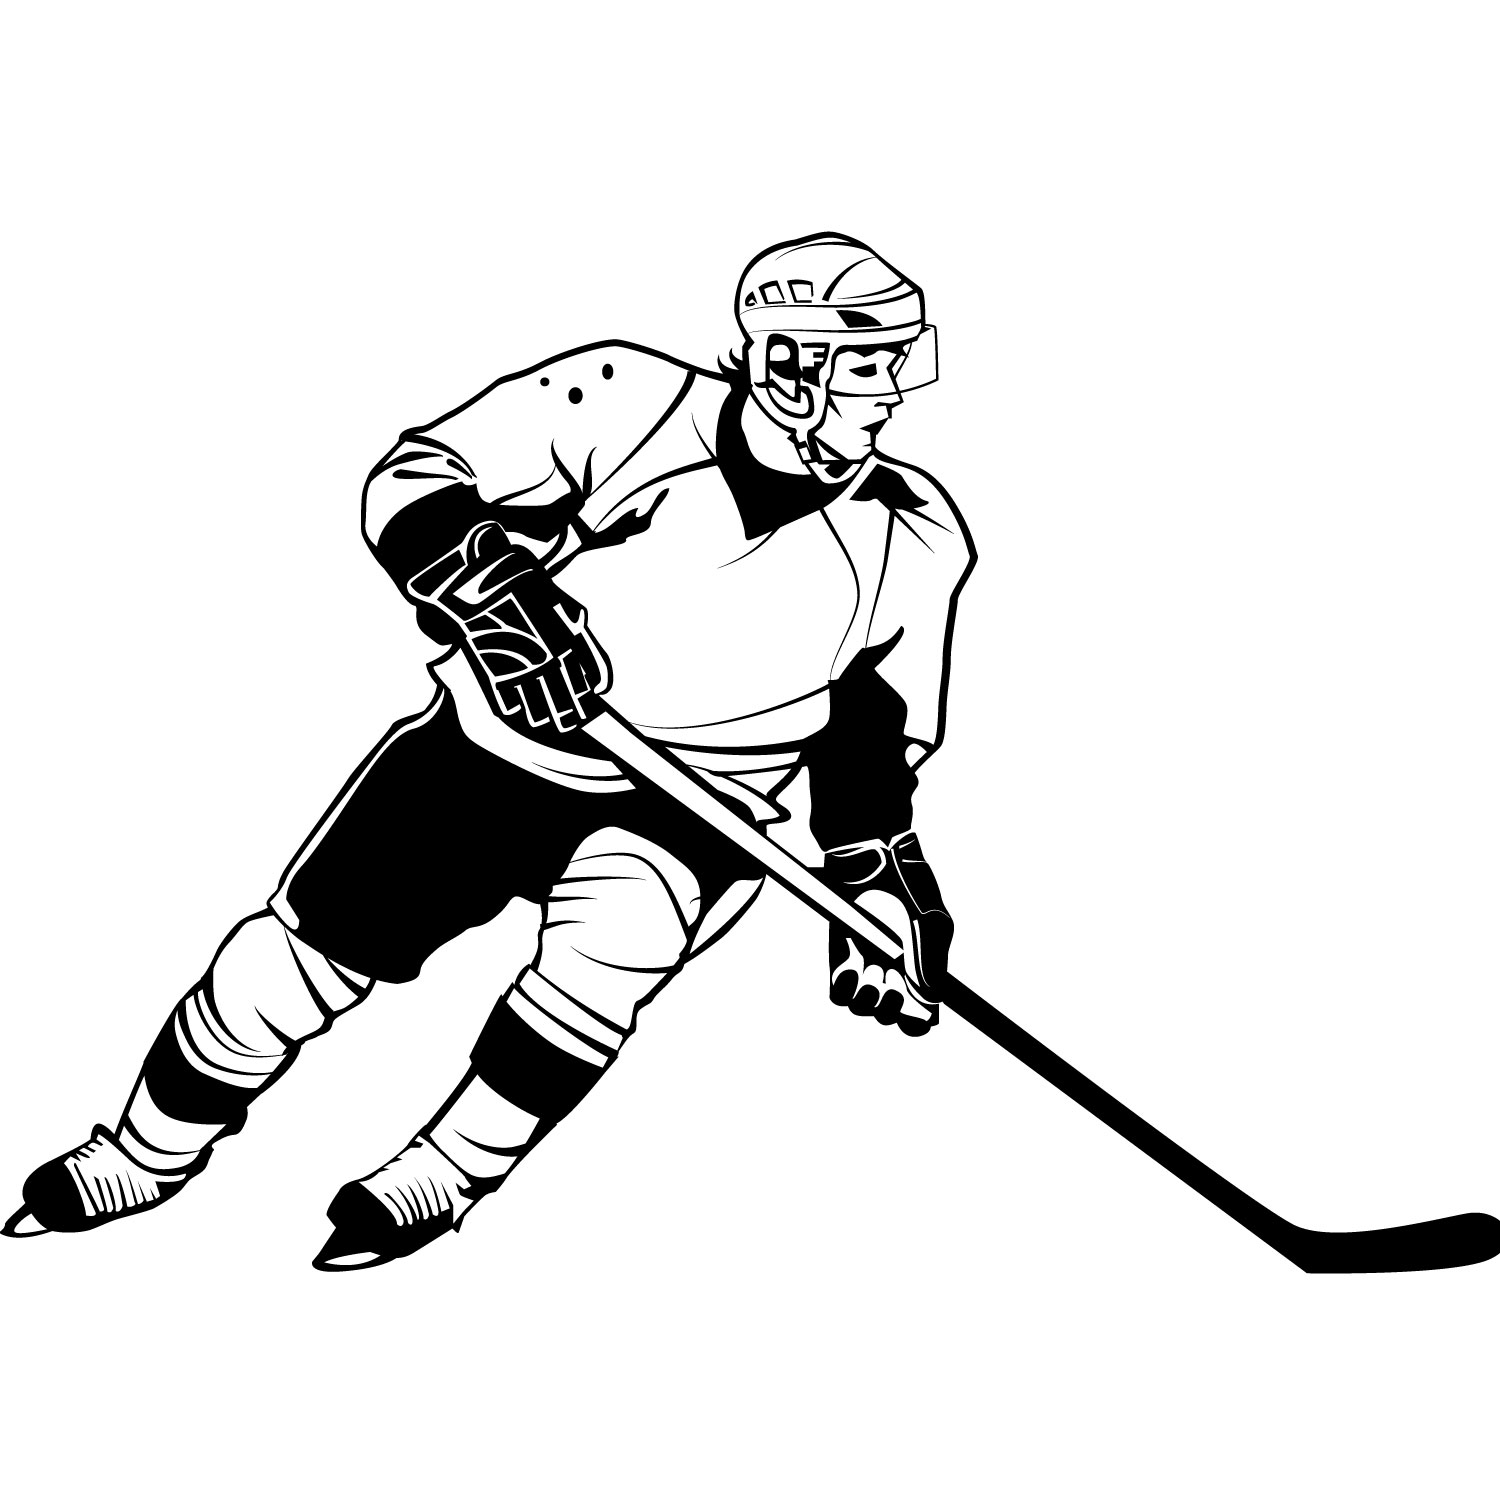 Hockey Clipart. Free Download Transparent .PNG or Vector